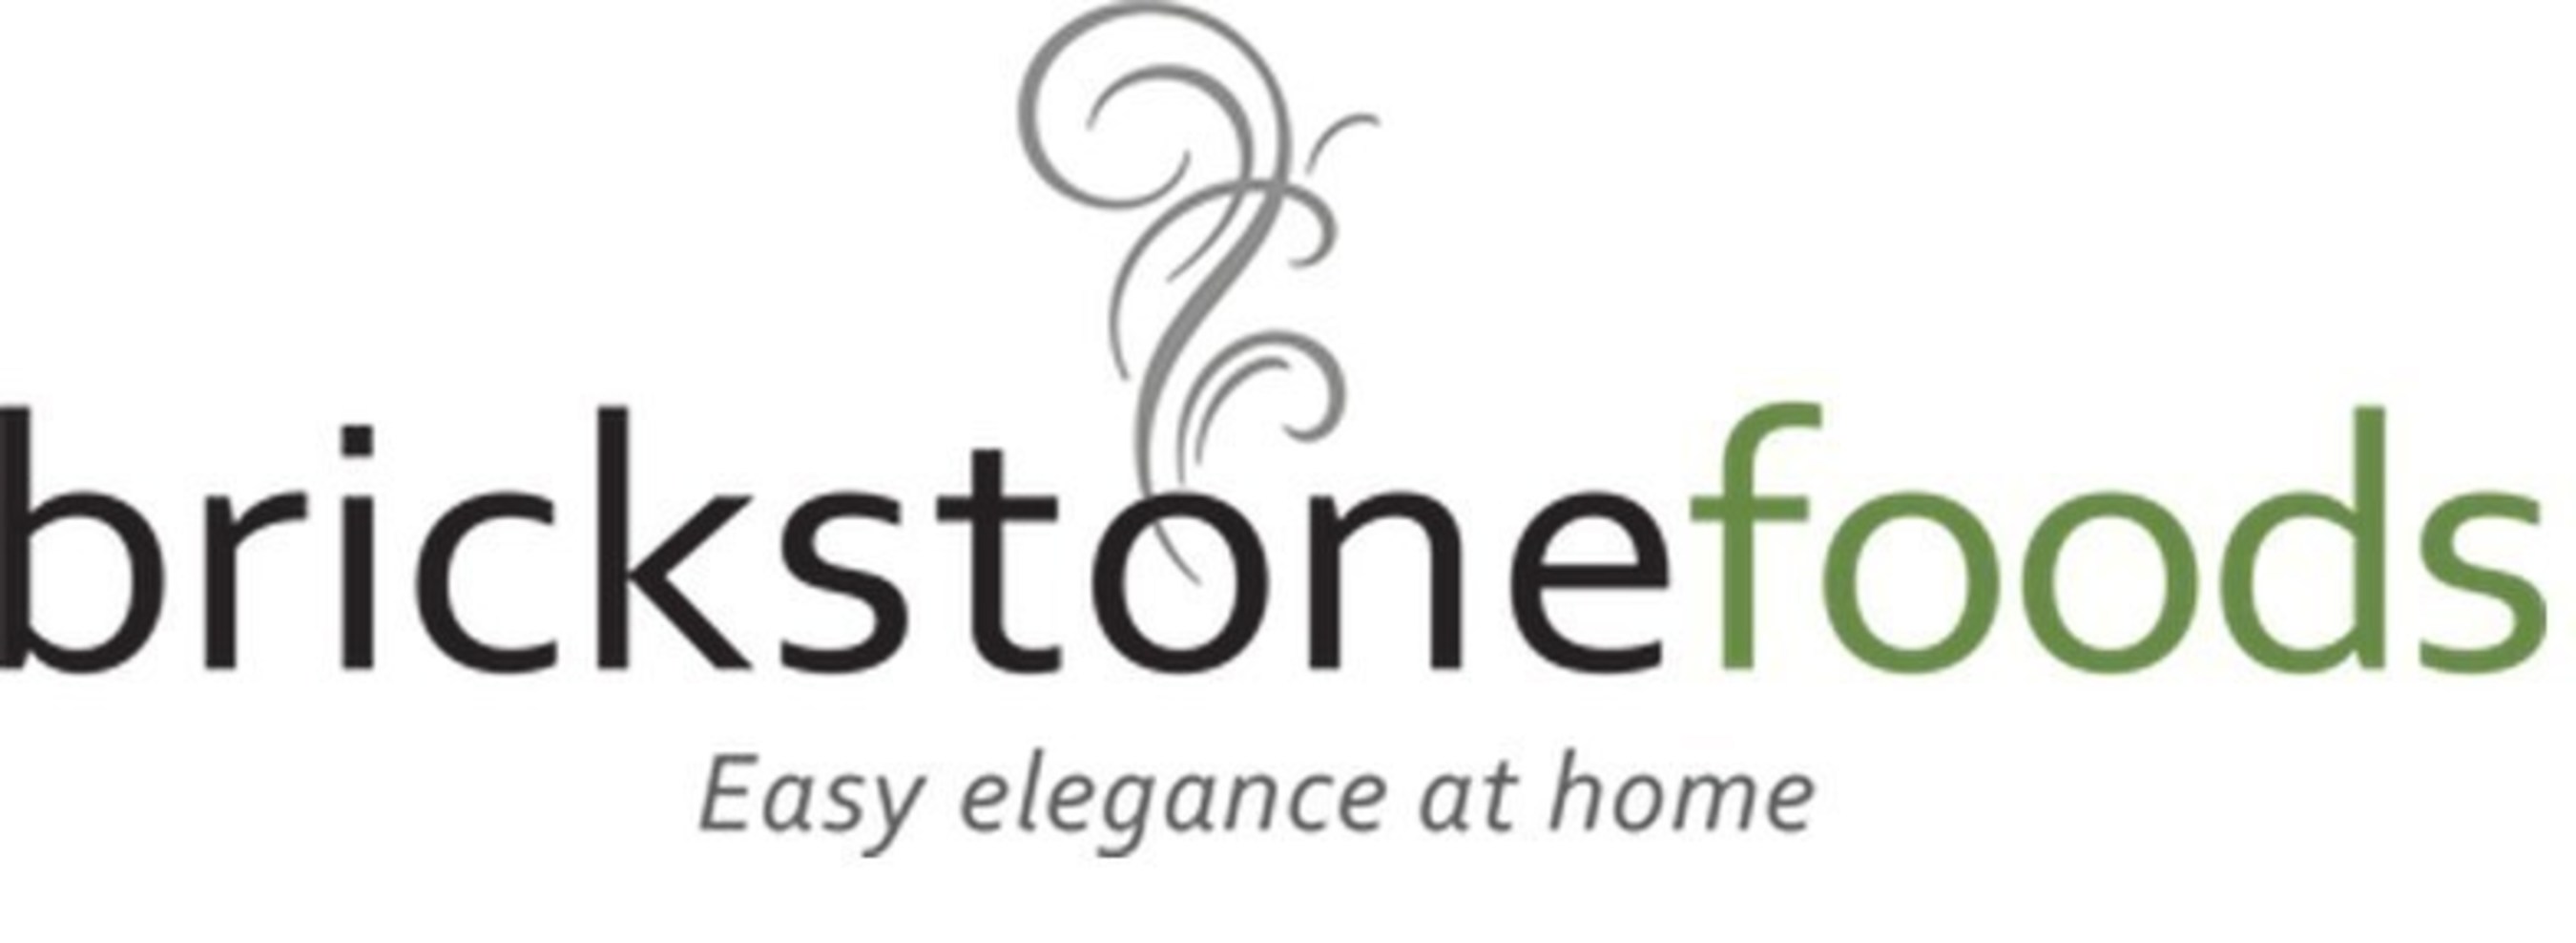 Gourmet Food Online Retailer Brickstone Foods Launches,Cooking Salmon On The Grill